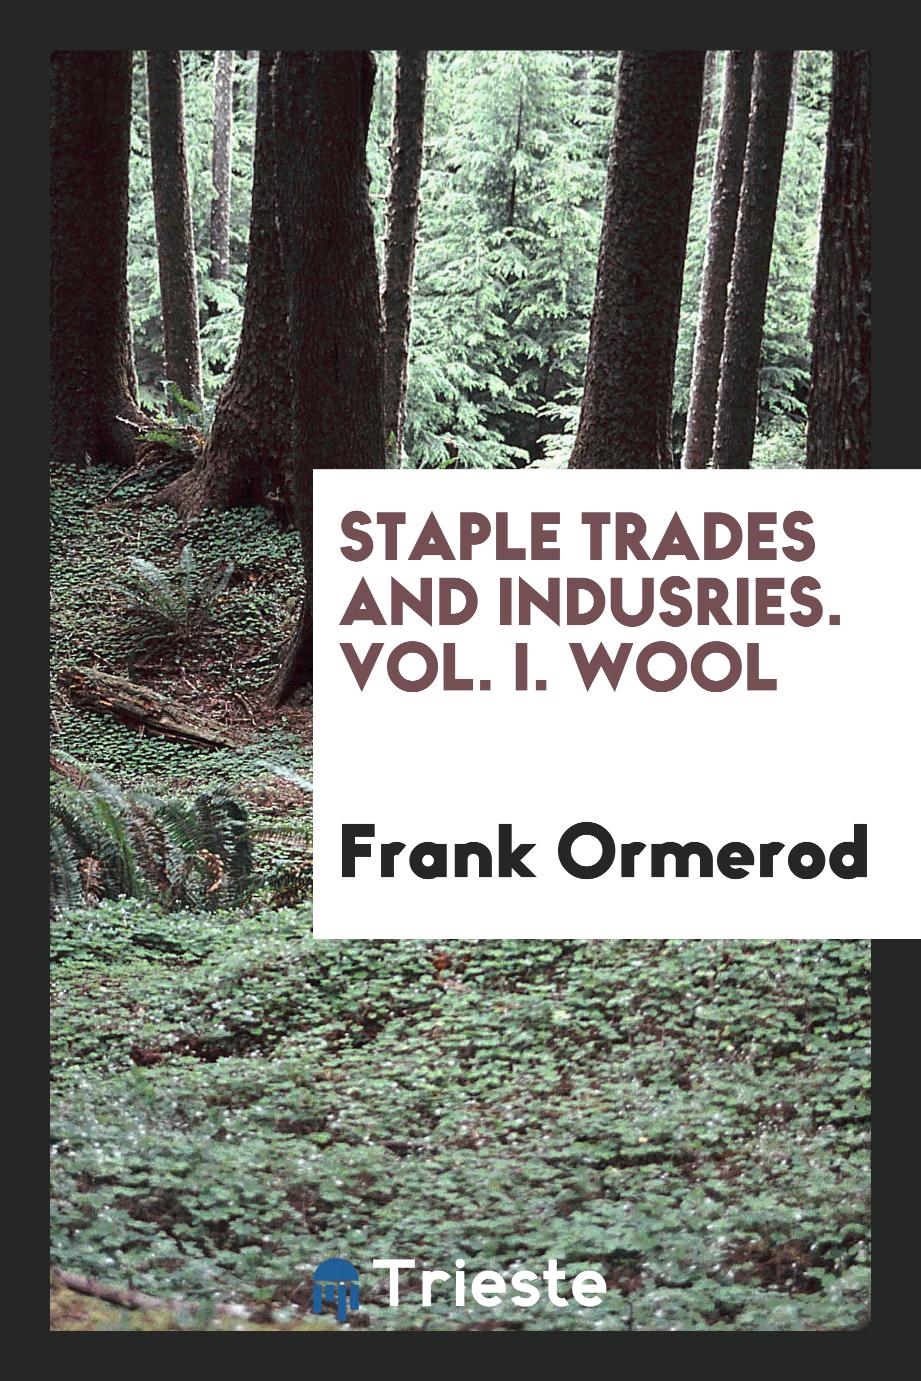 Staple Trades and indusries. Vol. I. Wool